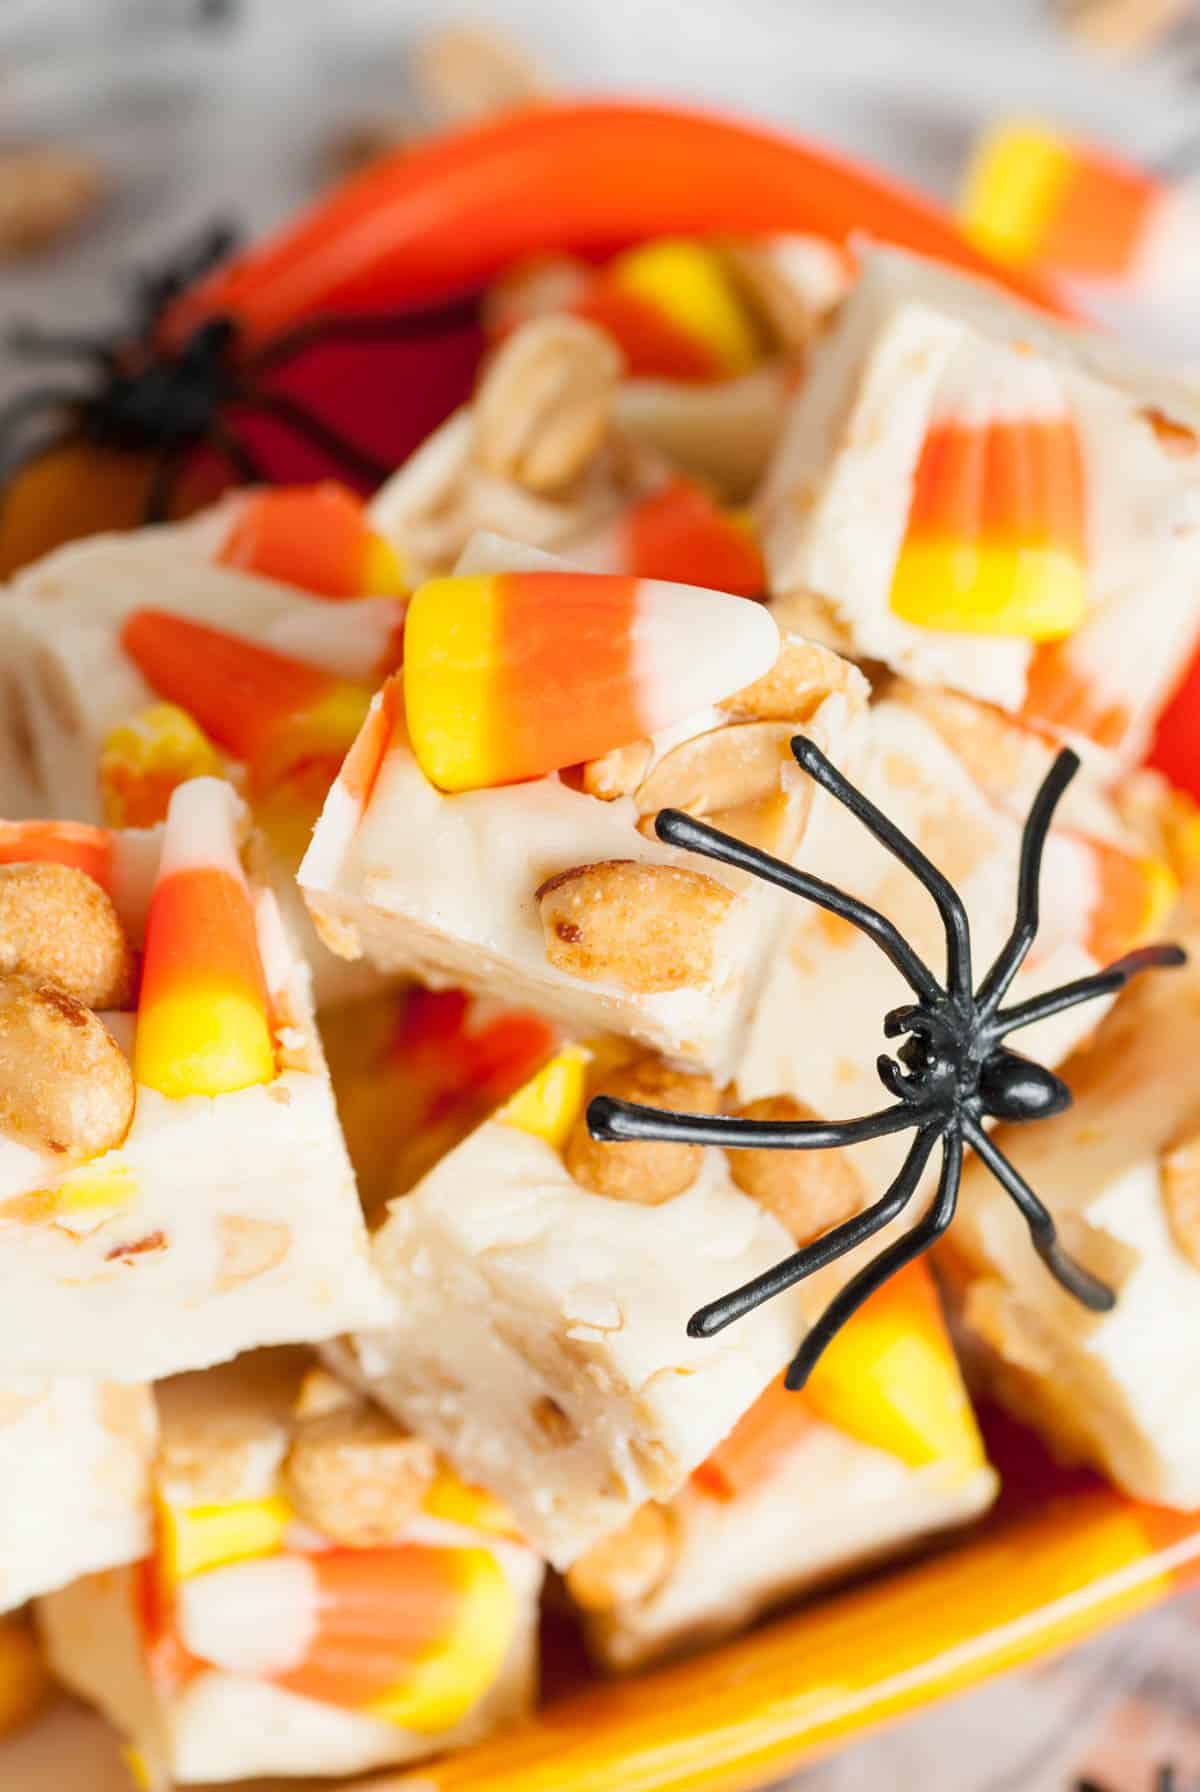 A black plastic spider crawling on pieces of halloween fudge with candy candy corn and peanuts.